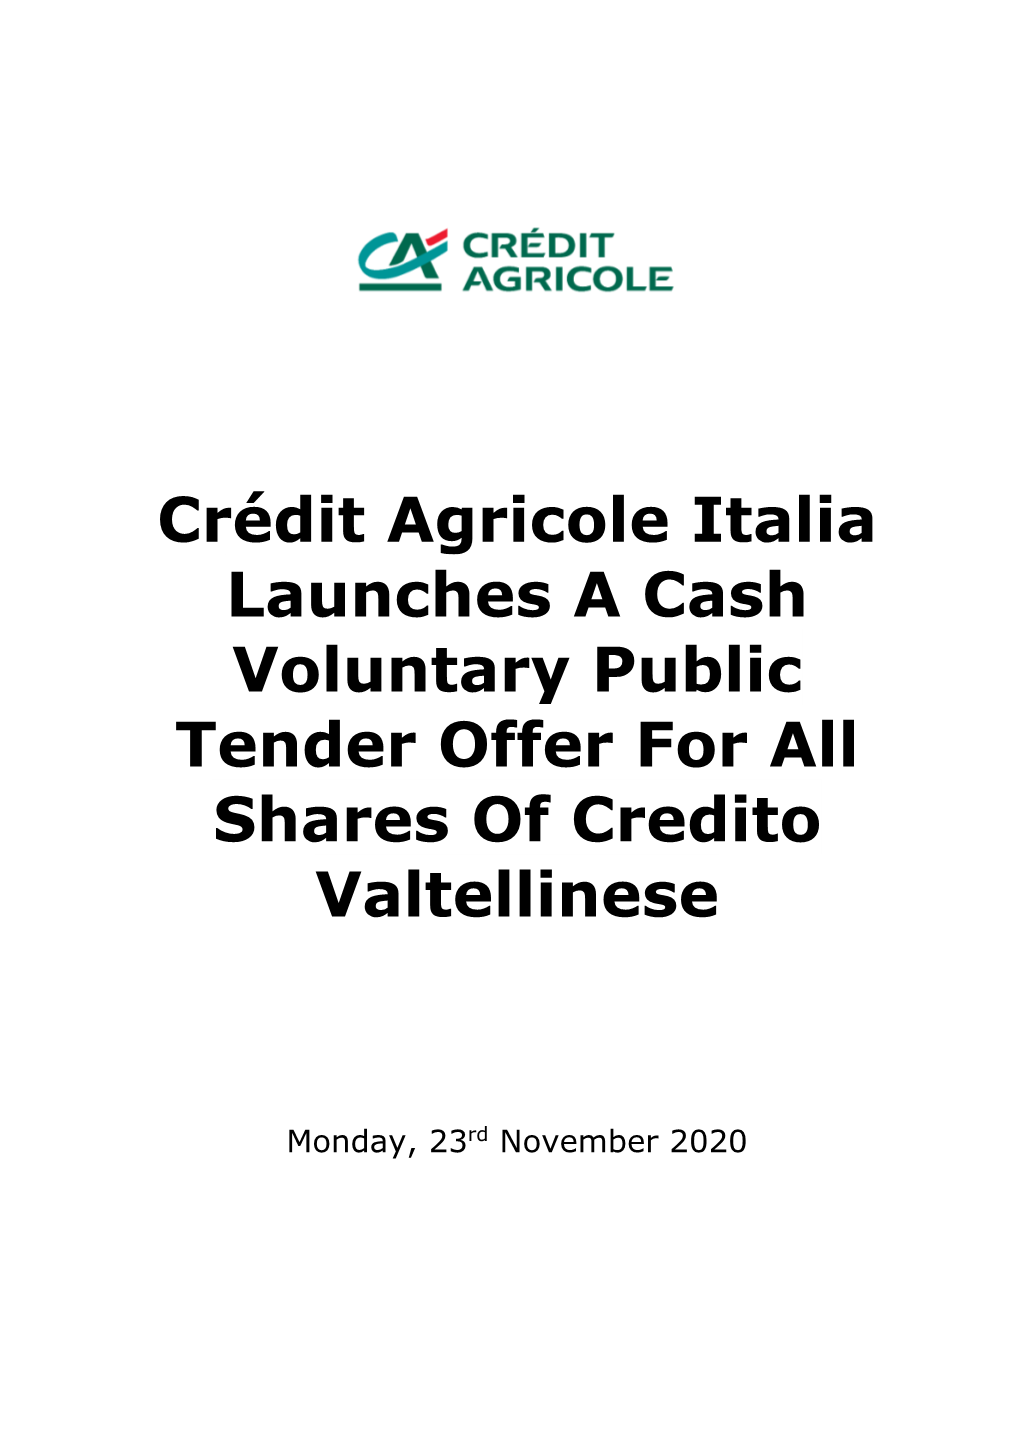 Crédit Agricole Italia Launches a Cash Voluntary Public Tender Offer for All Shares of Credito Valtellinese